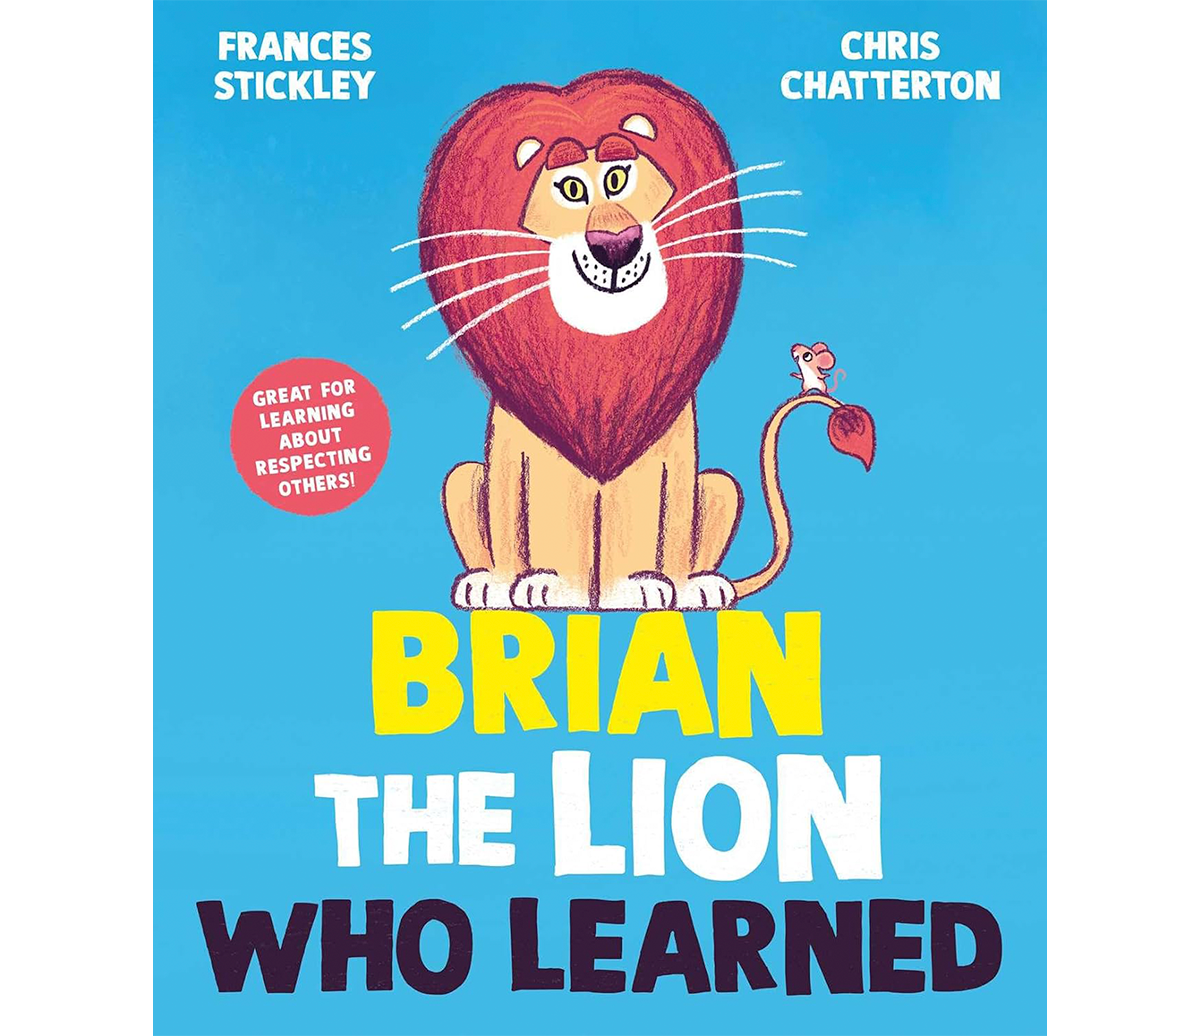 frances-stickley-brian-the-lion-who-learned.png